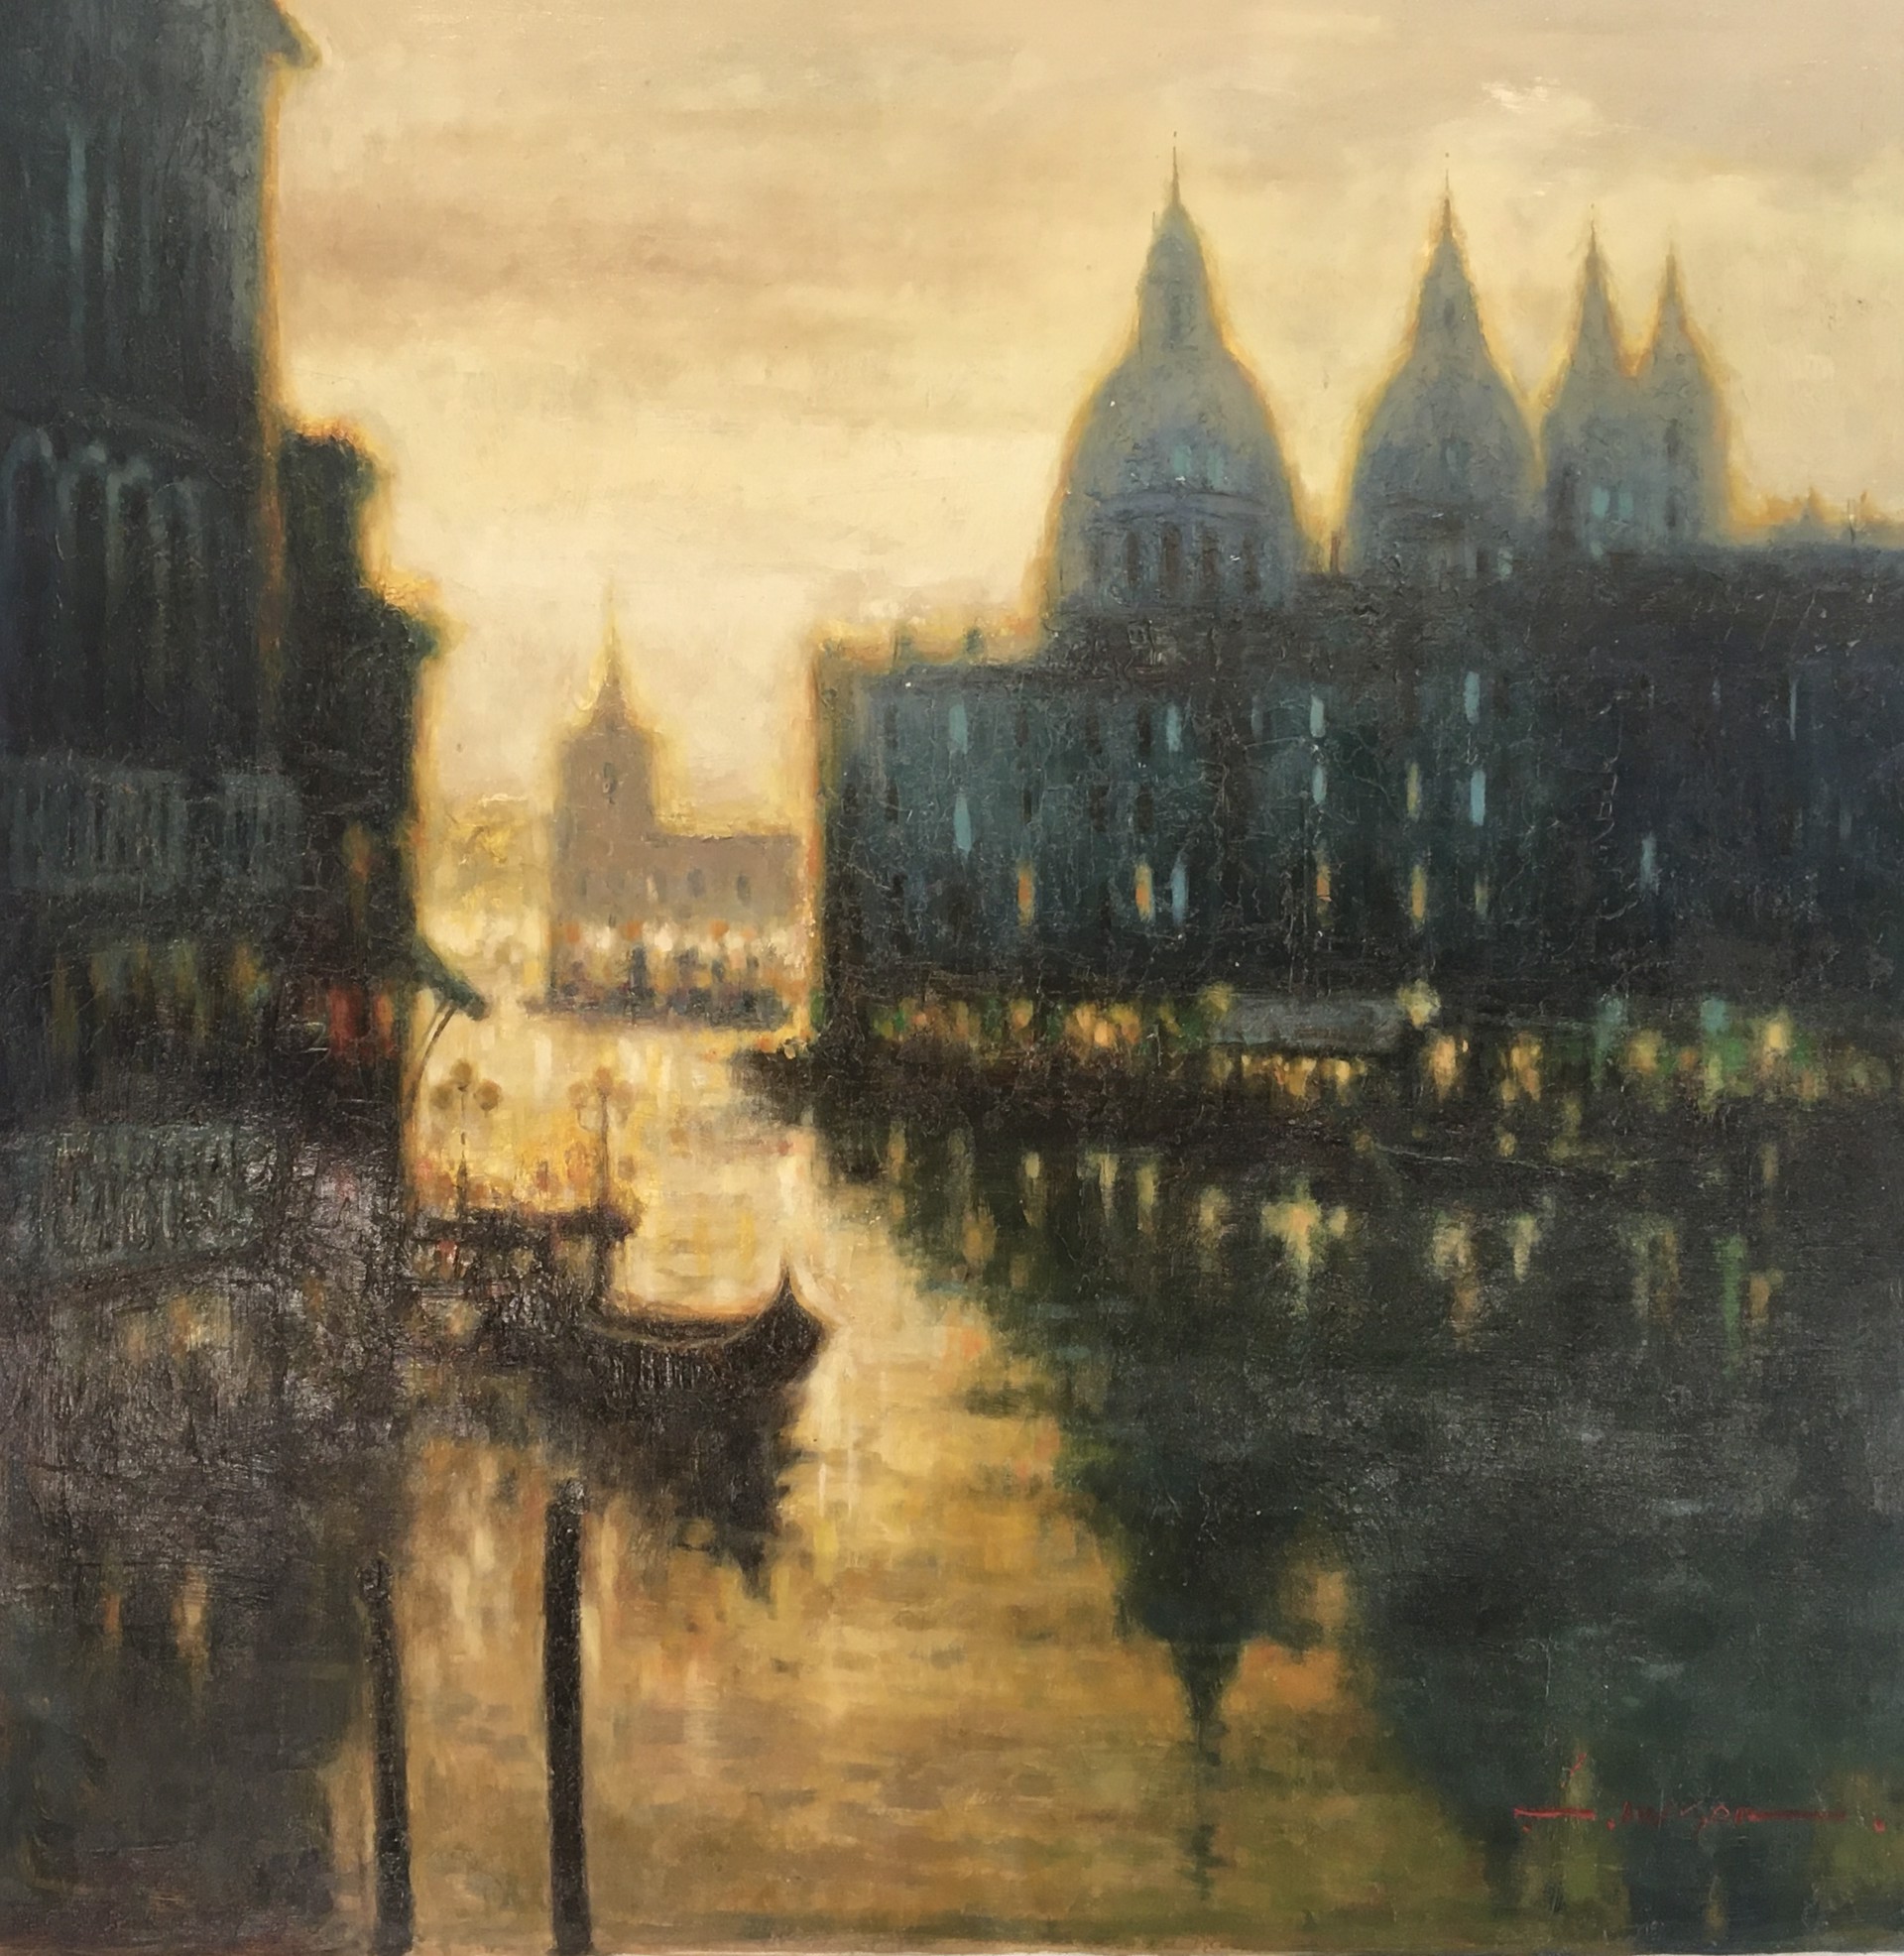 VENICE AT DUSK by LAWSON